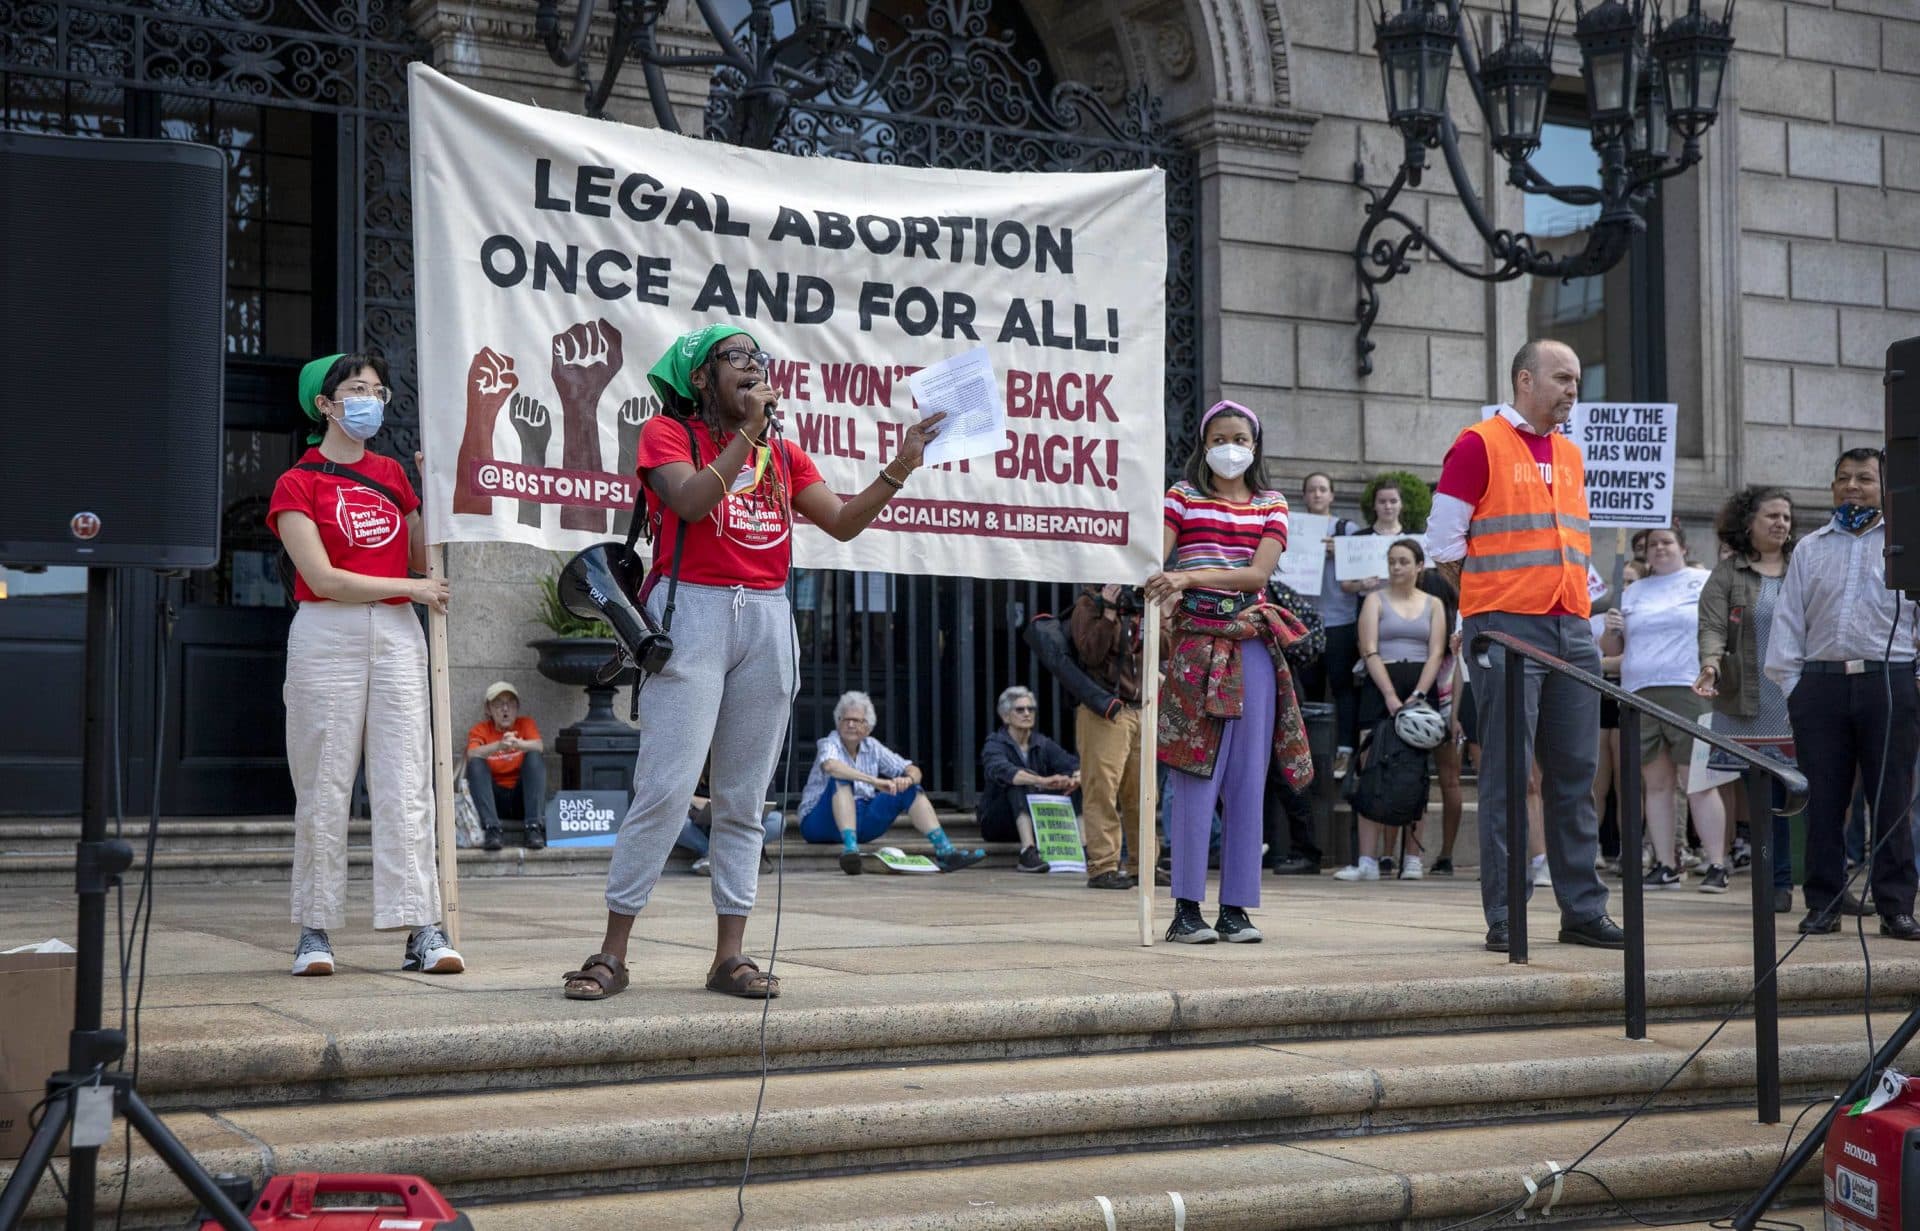 Party for Socialism and Liberation organizer Gabby Ballard talks to abortion-rights protesters from the steps of the Boston Public Library in Copley Square. (Robin Lubbock/WBUR)